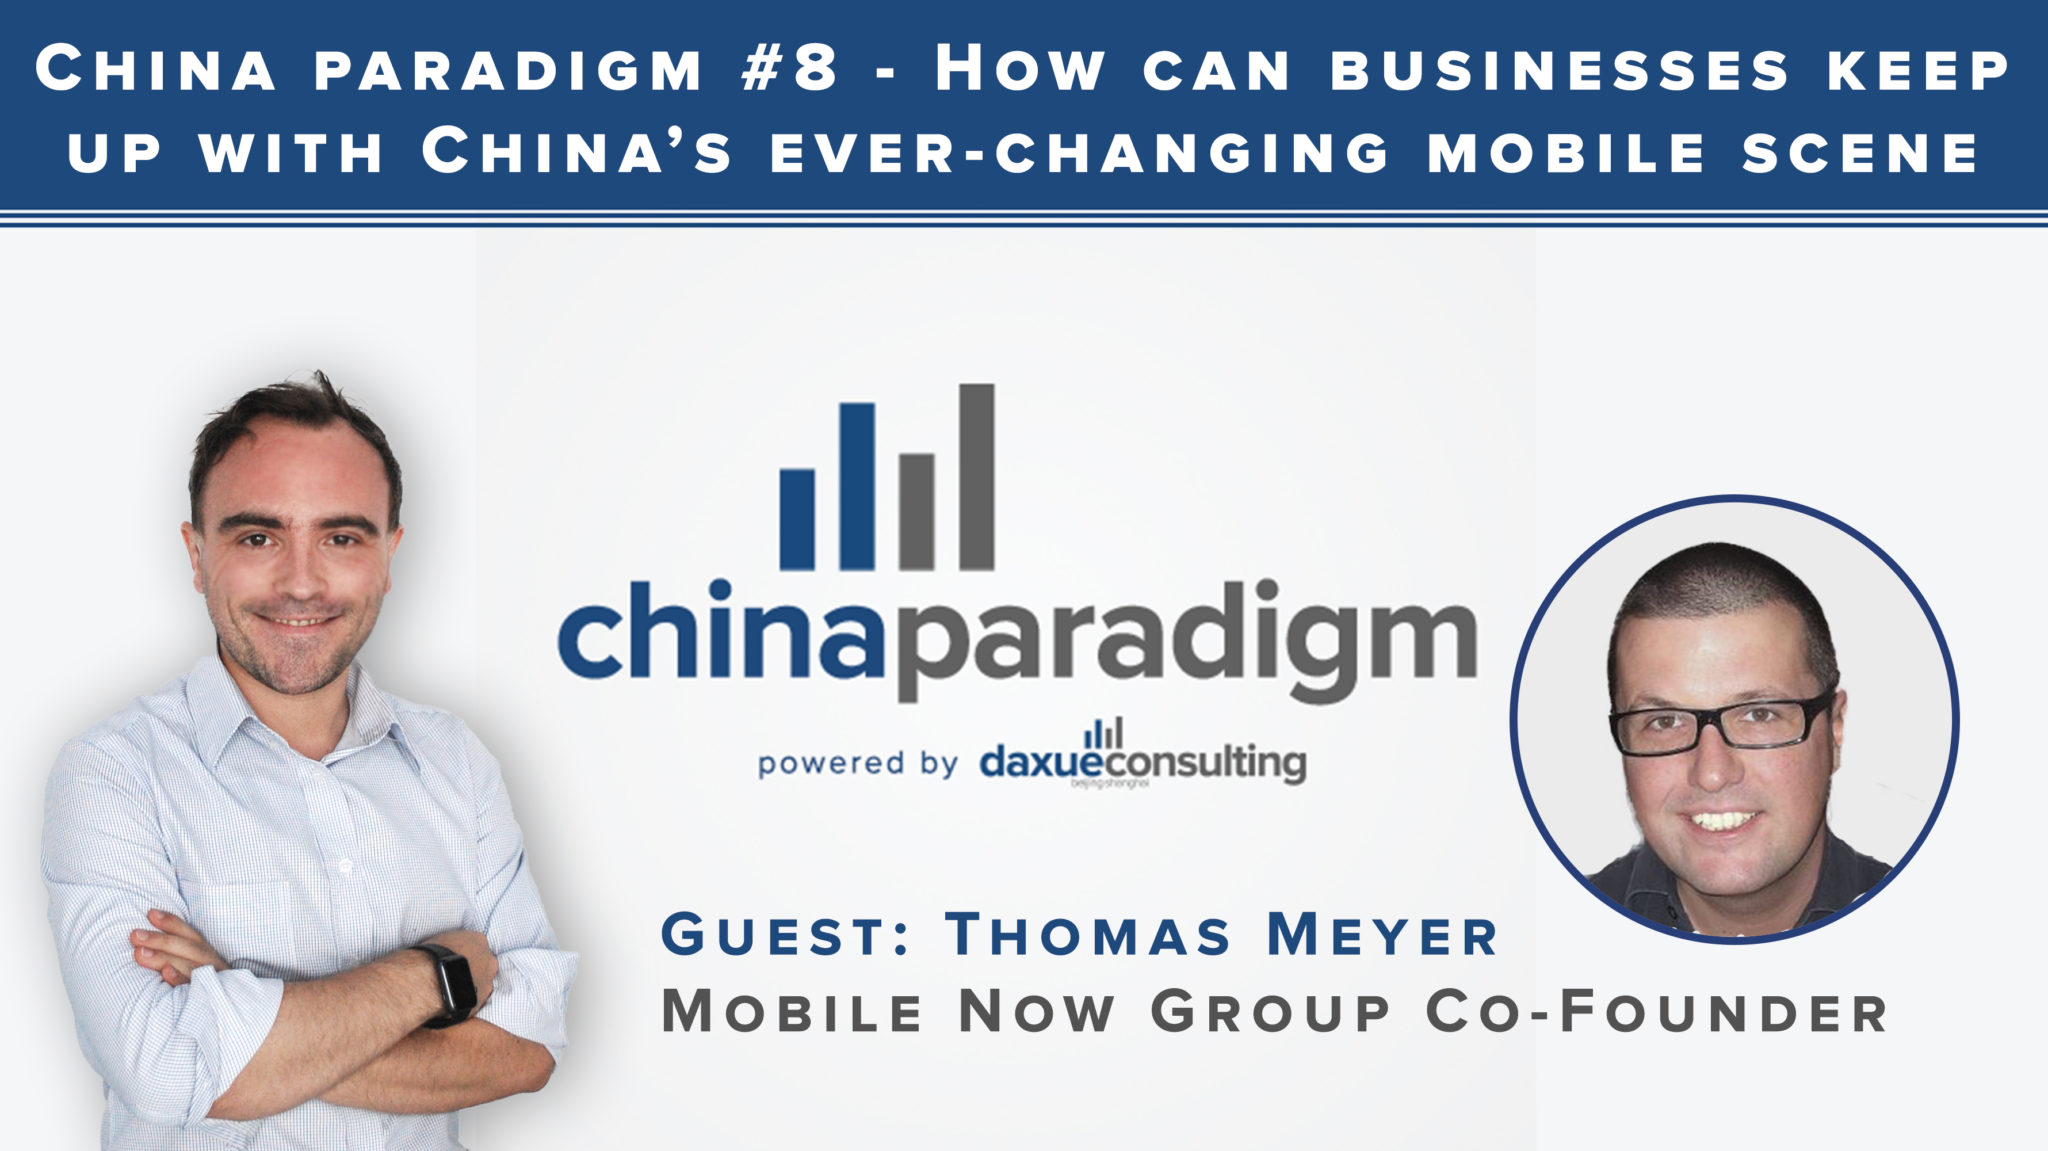 [Podcast] China paradigm #8: How can businesses keep up with China’s changing mobile scene?